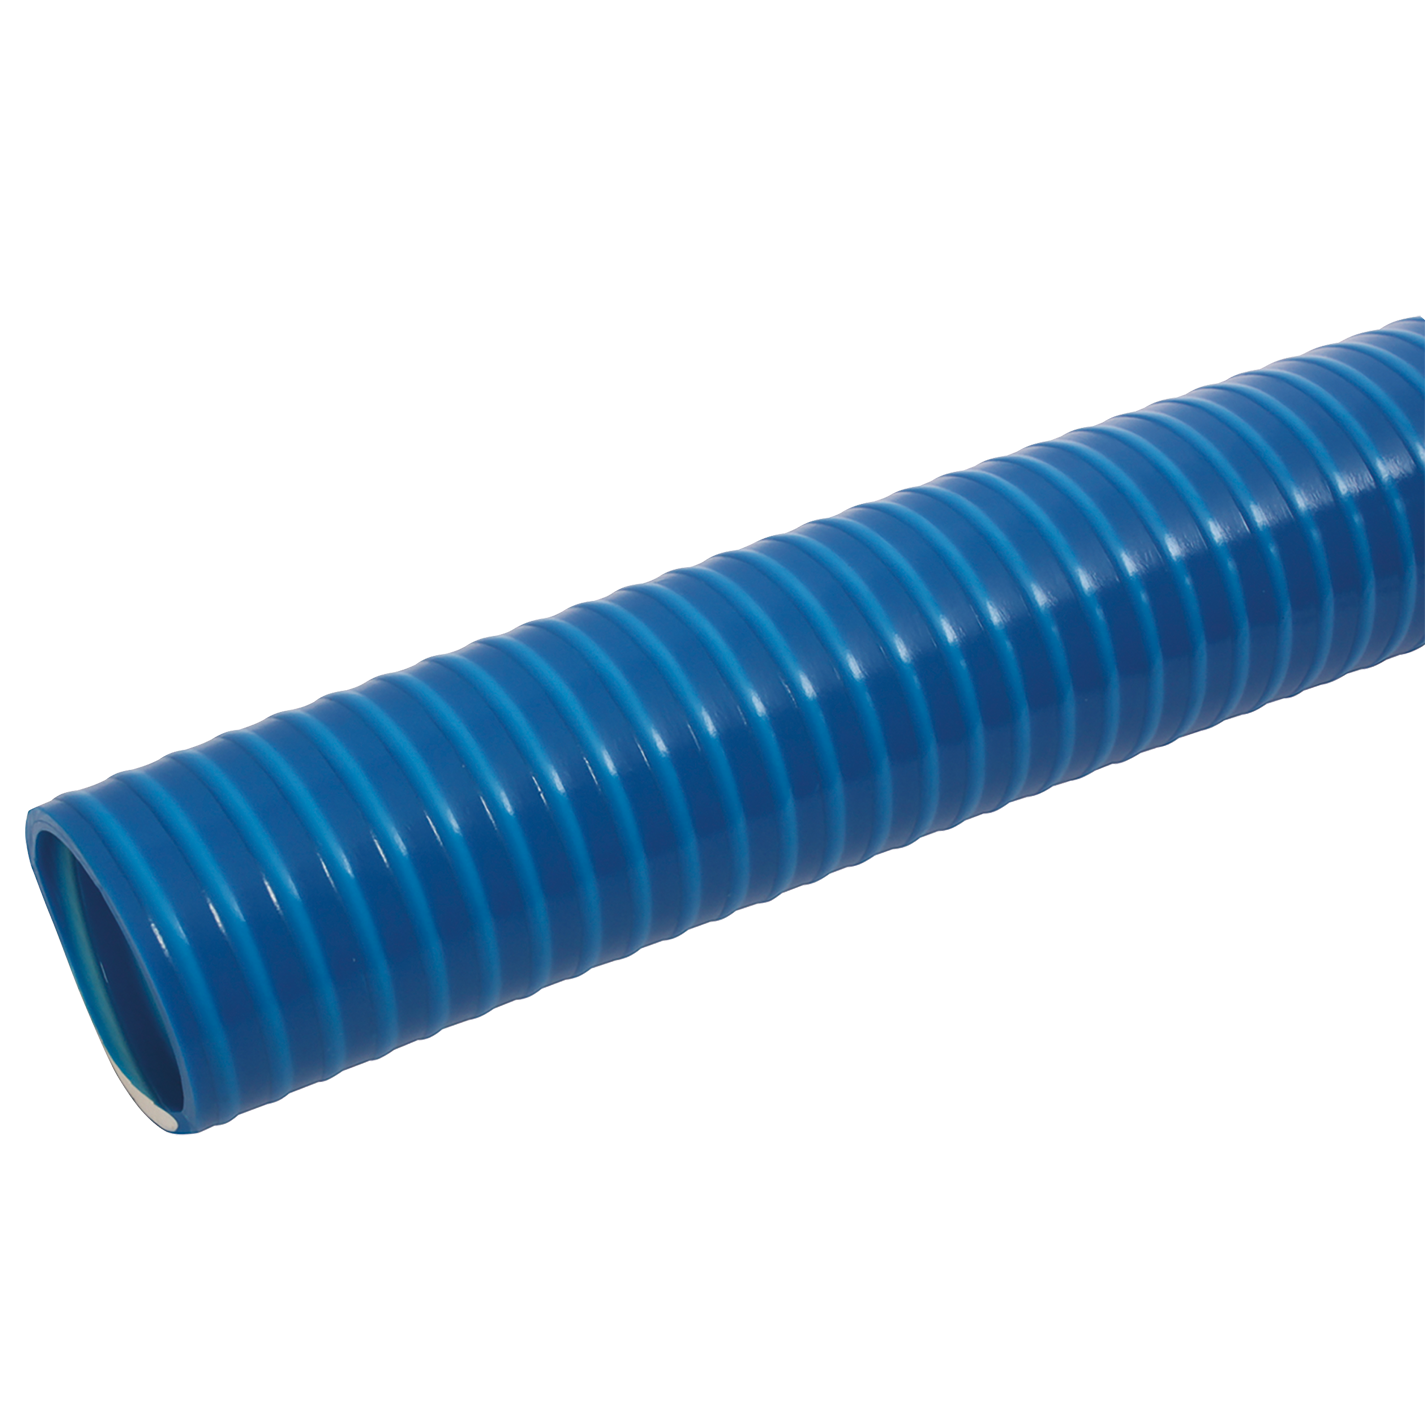 Oil Suction and Delivery Hose - The Seal Extrusion Company LTD